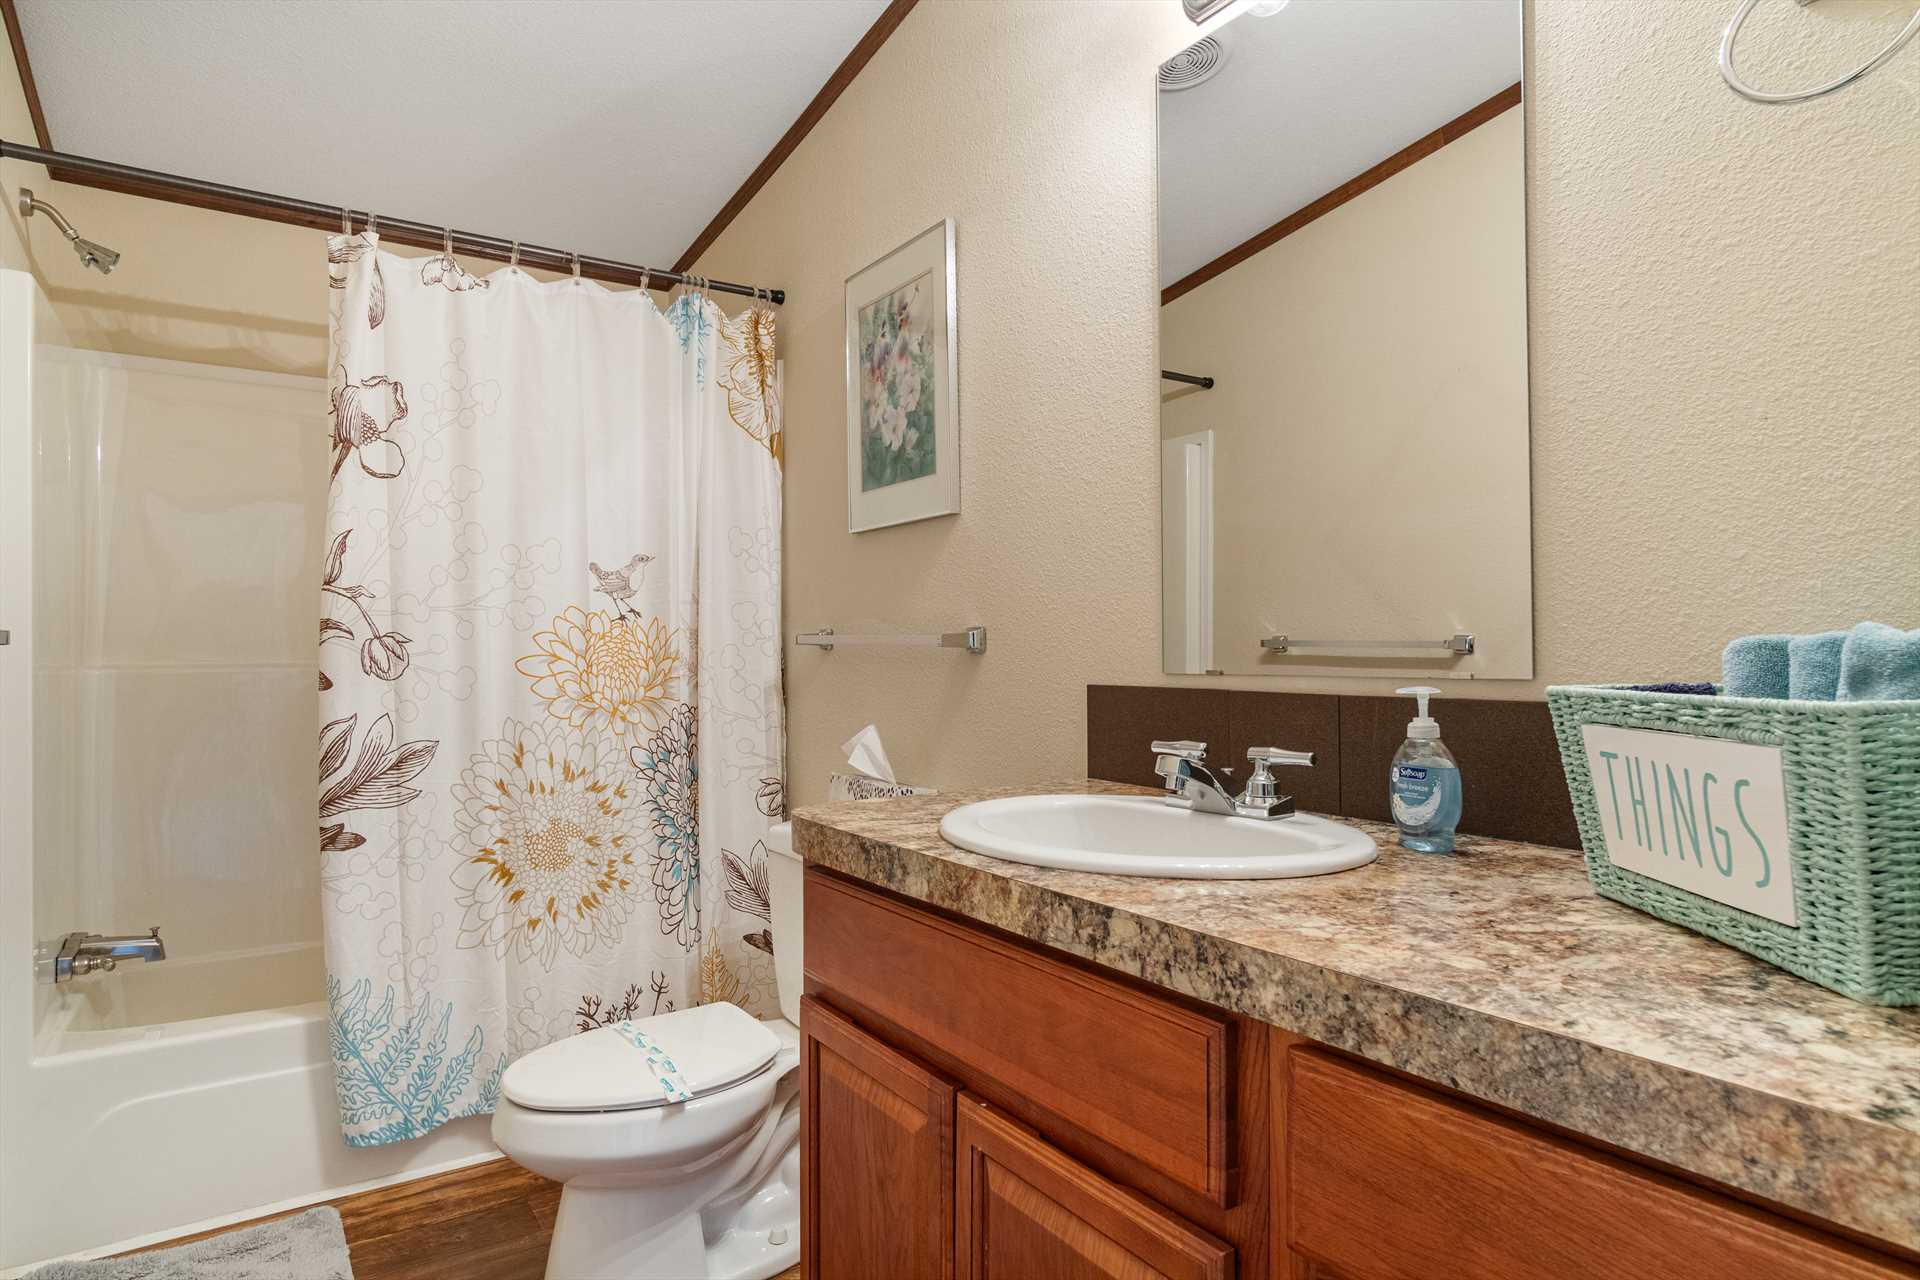                                                 A full bath with a tub and shower combo and clean, fluffy linens is shared by the second and third bedrooms.